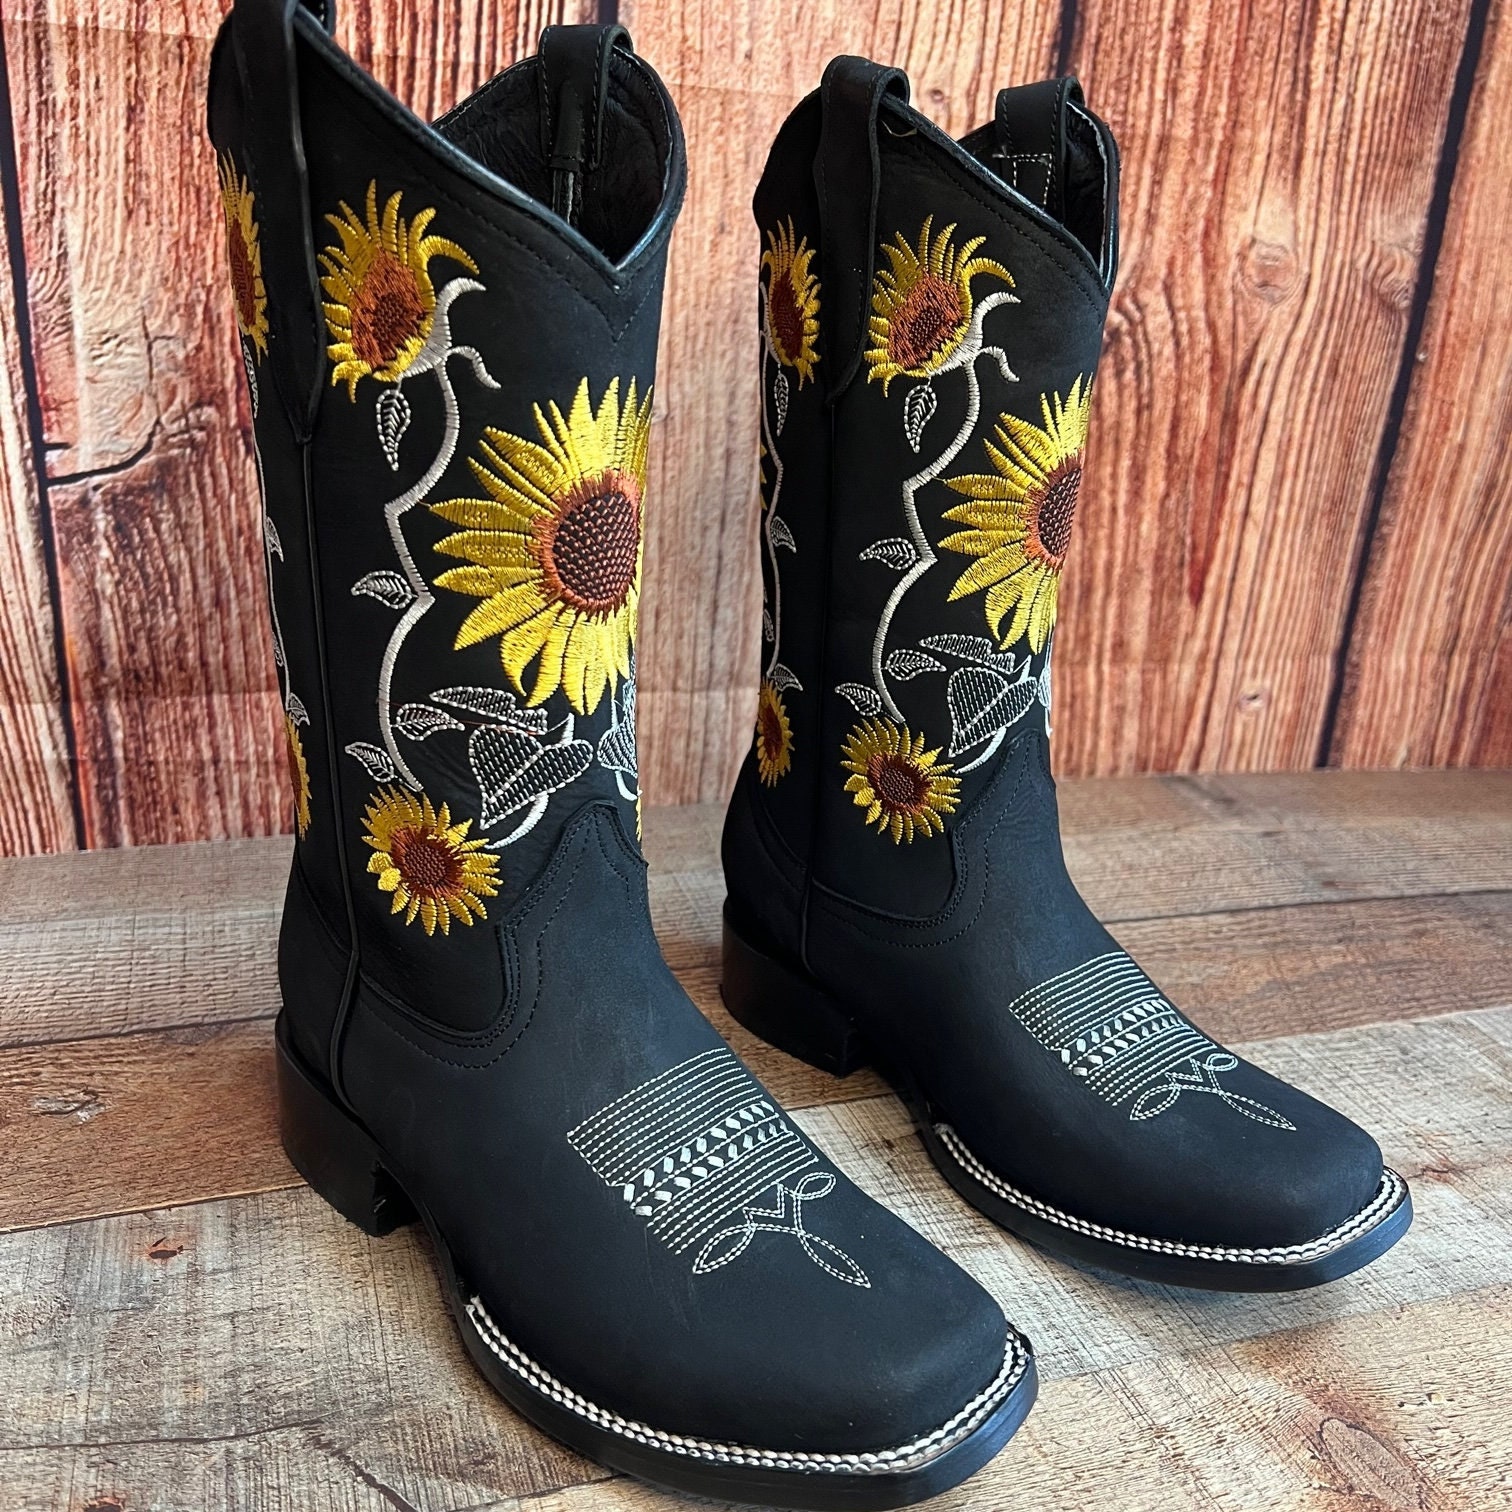 WOMENS COWGIRL Square Toe Leather Sunflower Embroidered BOOTS Botas Vaqueras  Para Dama Est. 711 -  Canada